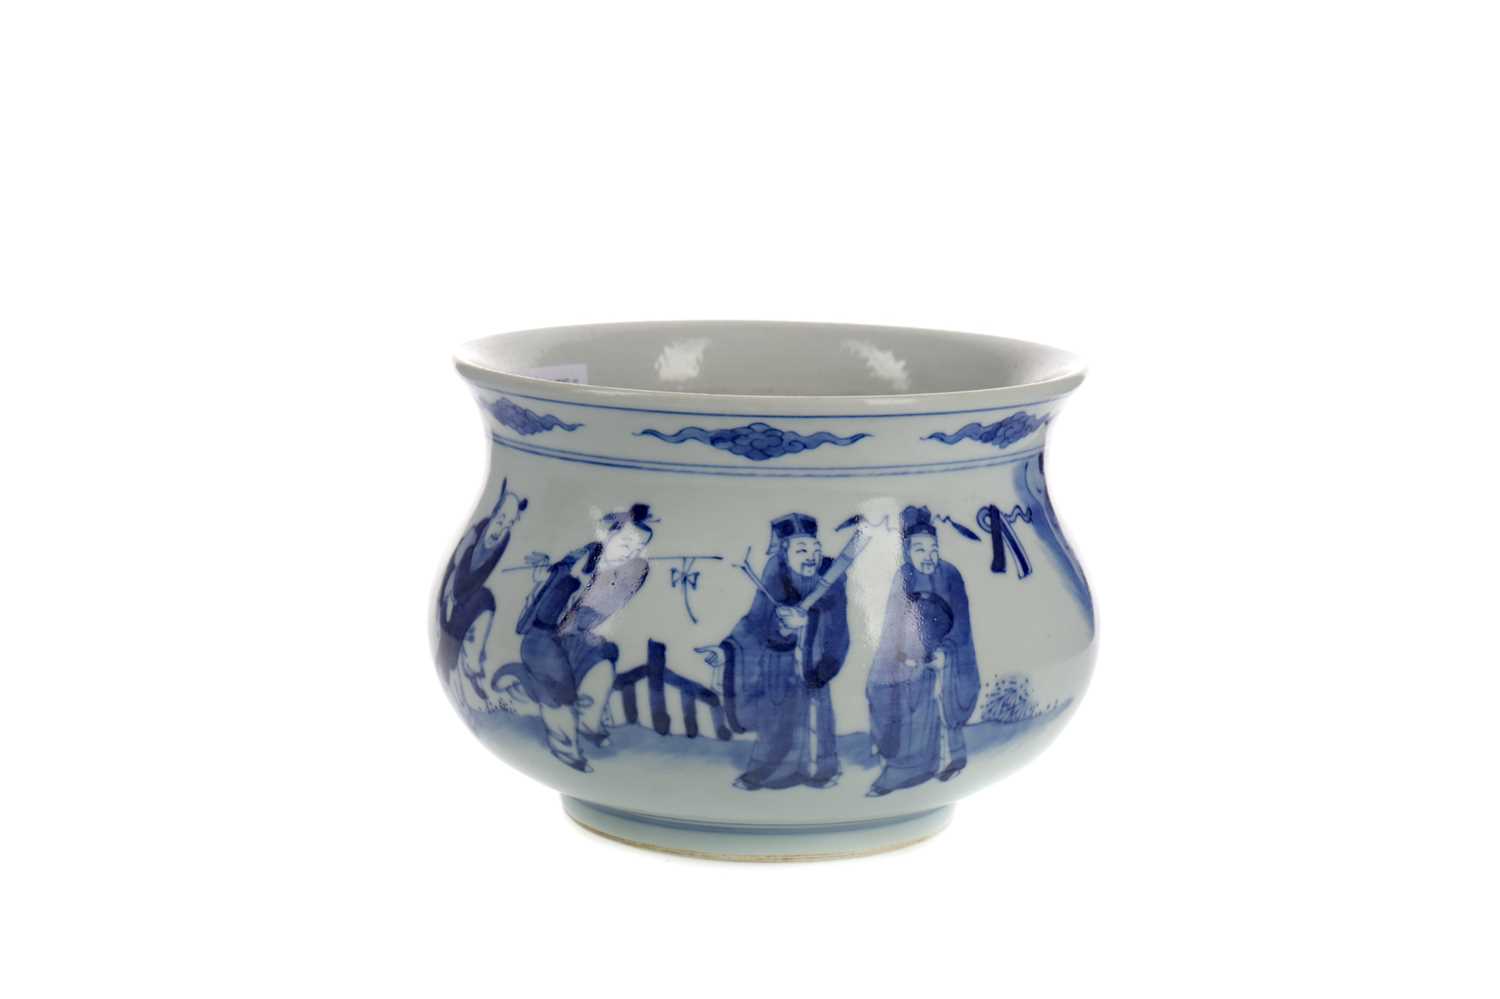 Lot 834 - A 20TH CENTURY CHINESE POT